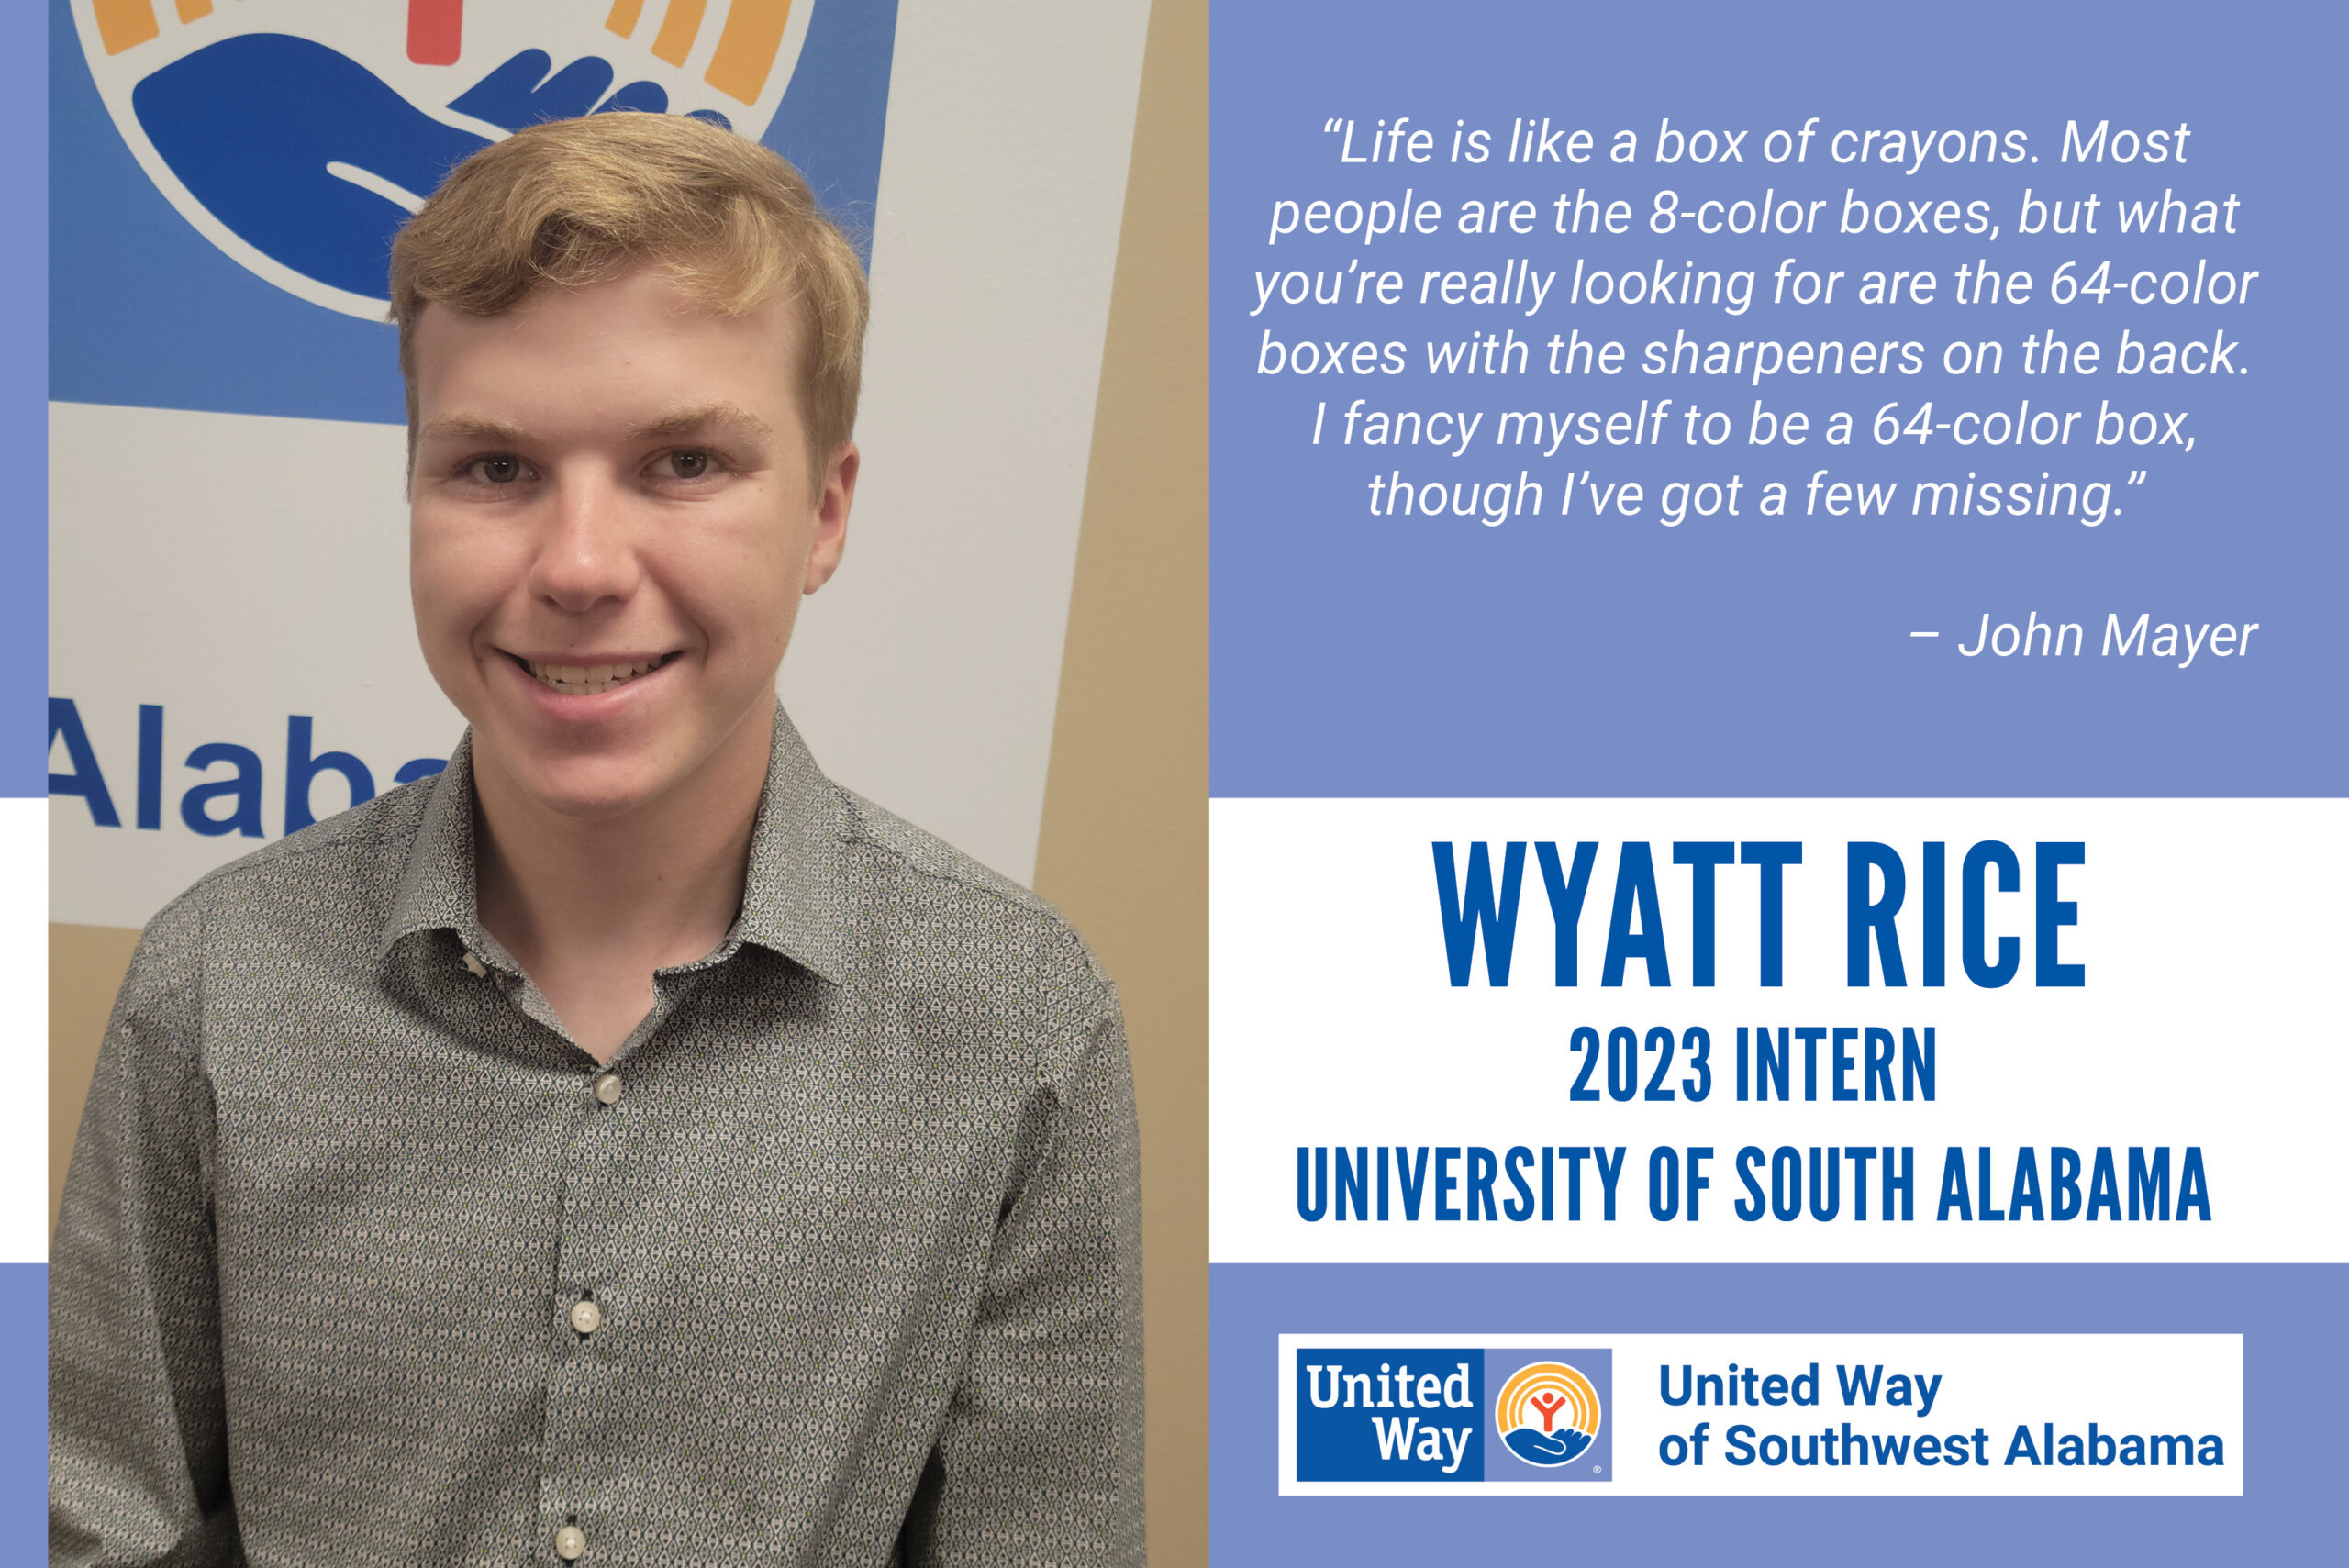 "Life is like a box of crayons. Most people are the 8-color boxes, but what you're really looking for are the 64-color boxes with the sharpeners on the back. I fancy myself to be a 64-color box, though I've got a few missing." John Mayer Wyatt Rice, 2023 Intern from the University of South Alabama